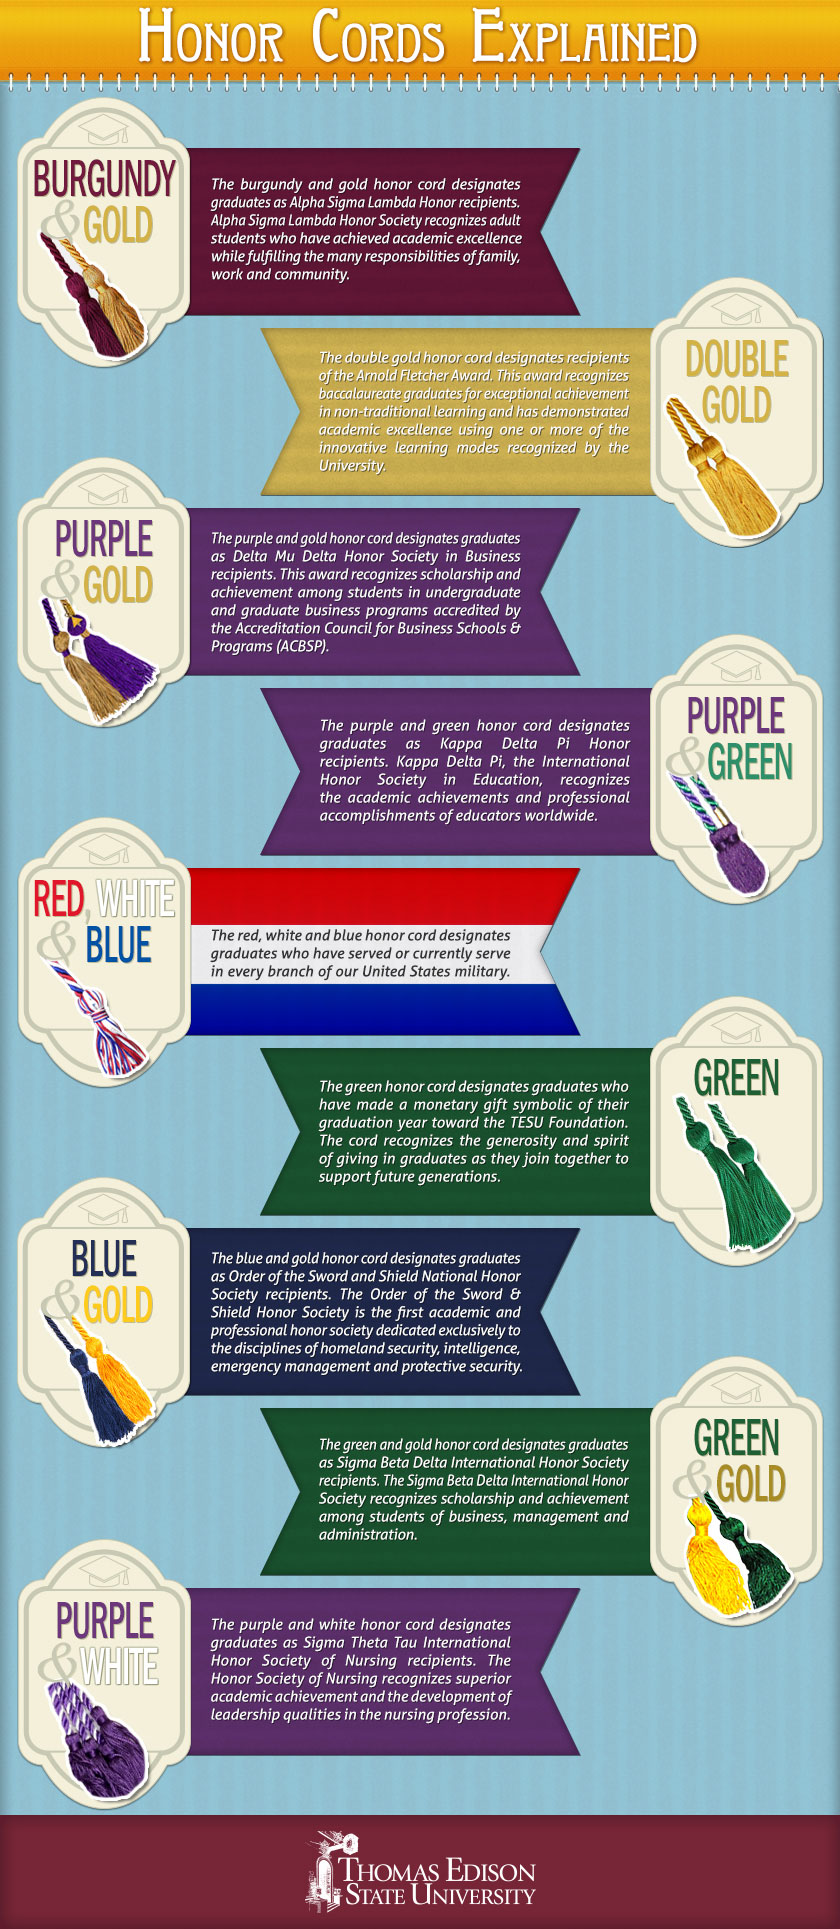 Honor cords explained (infographic)